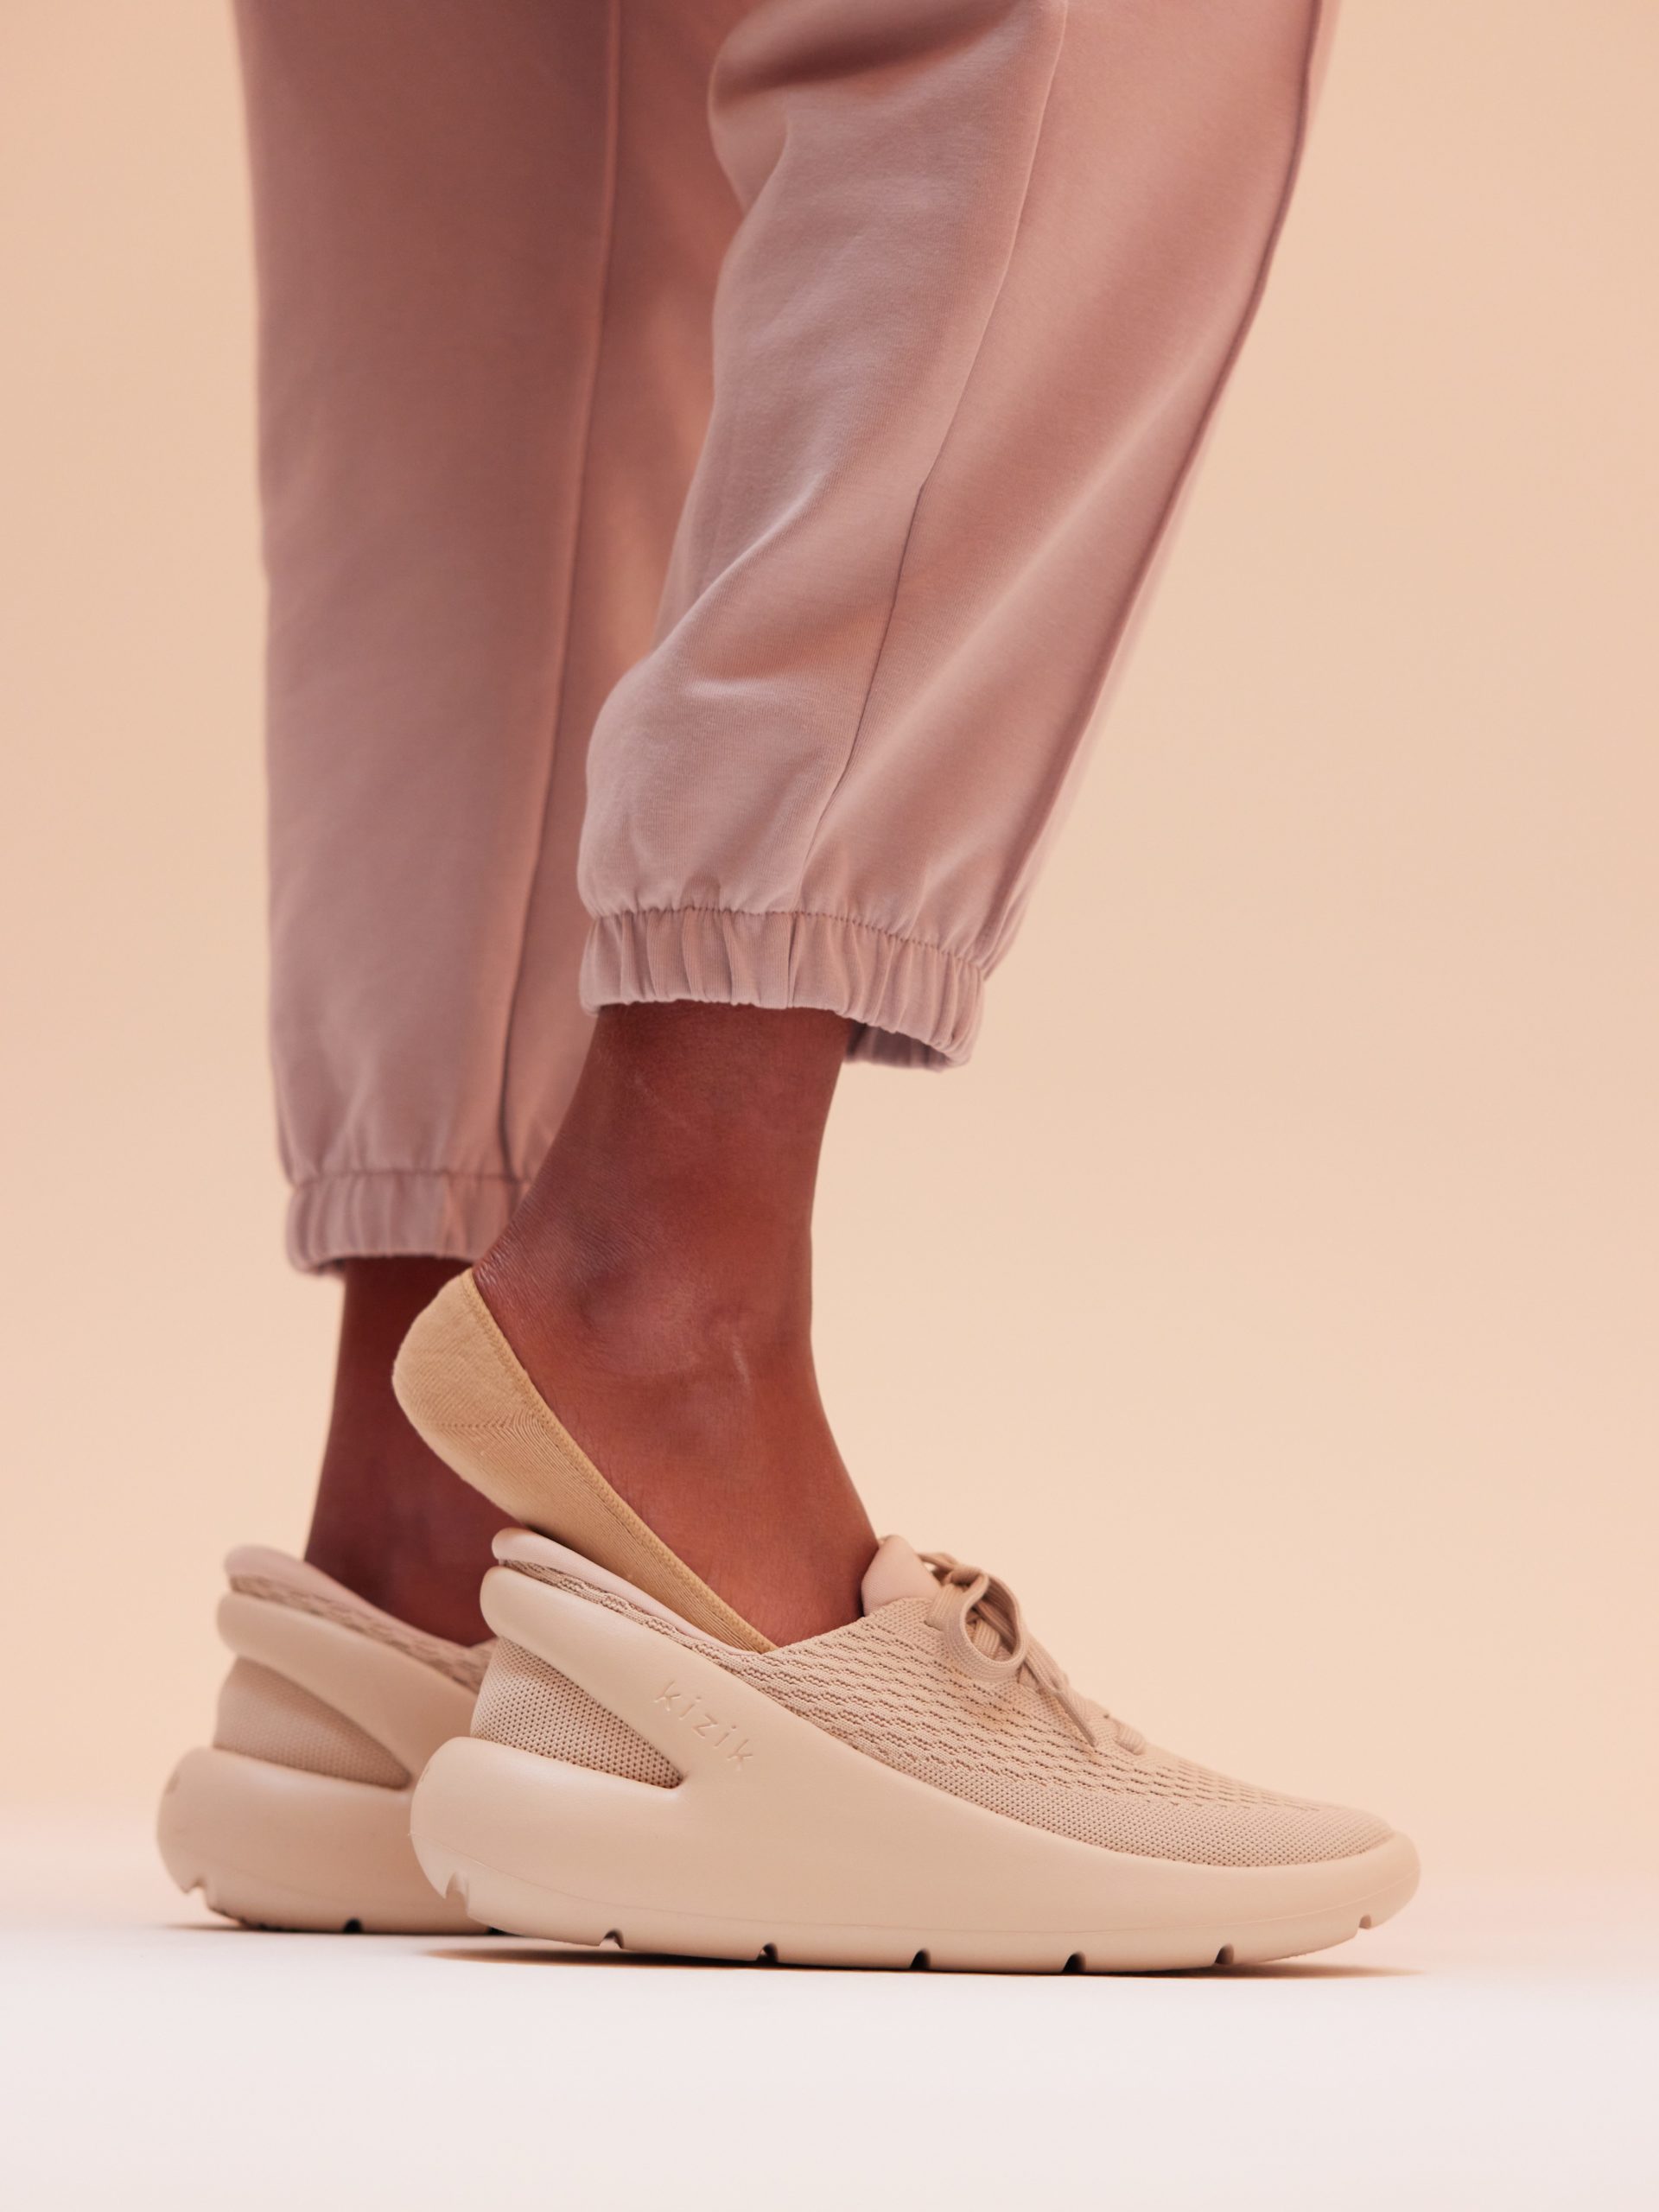 Visual of a woman stepping into Kizik's newest athleisure sneaker, Roamer, in pink.